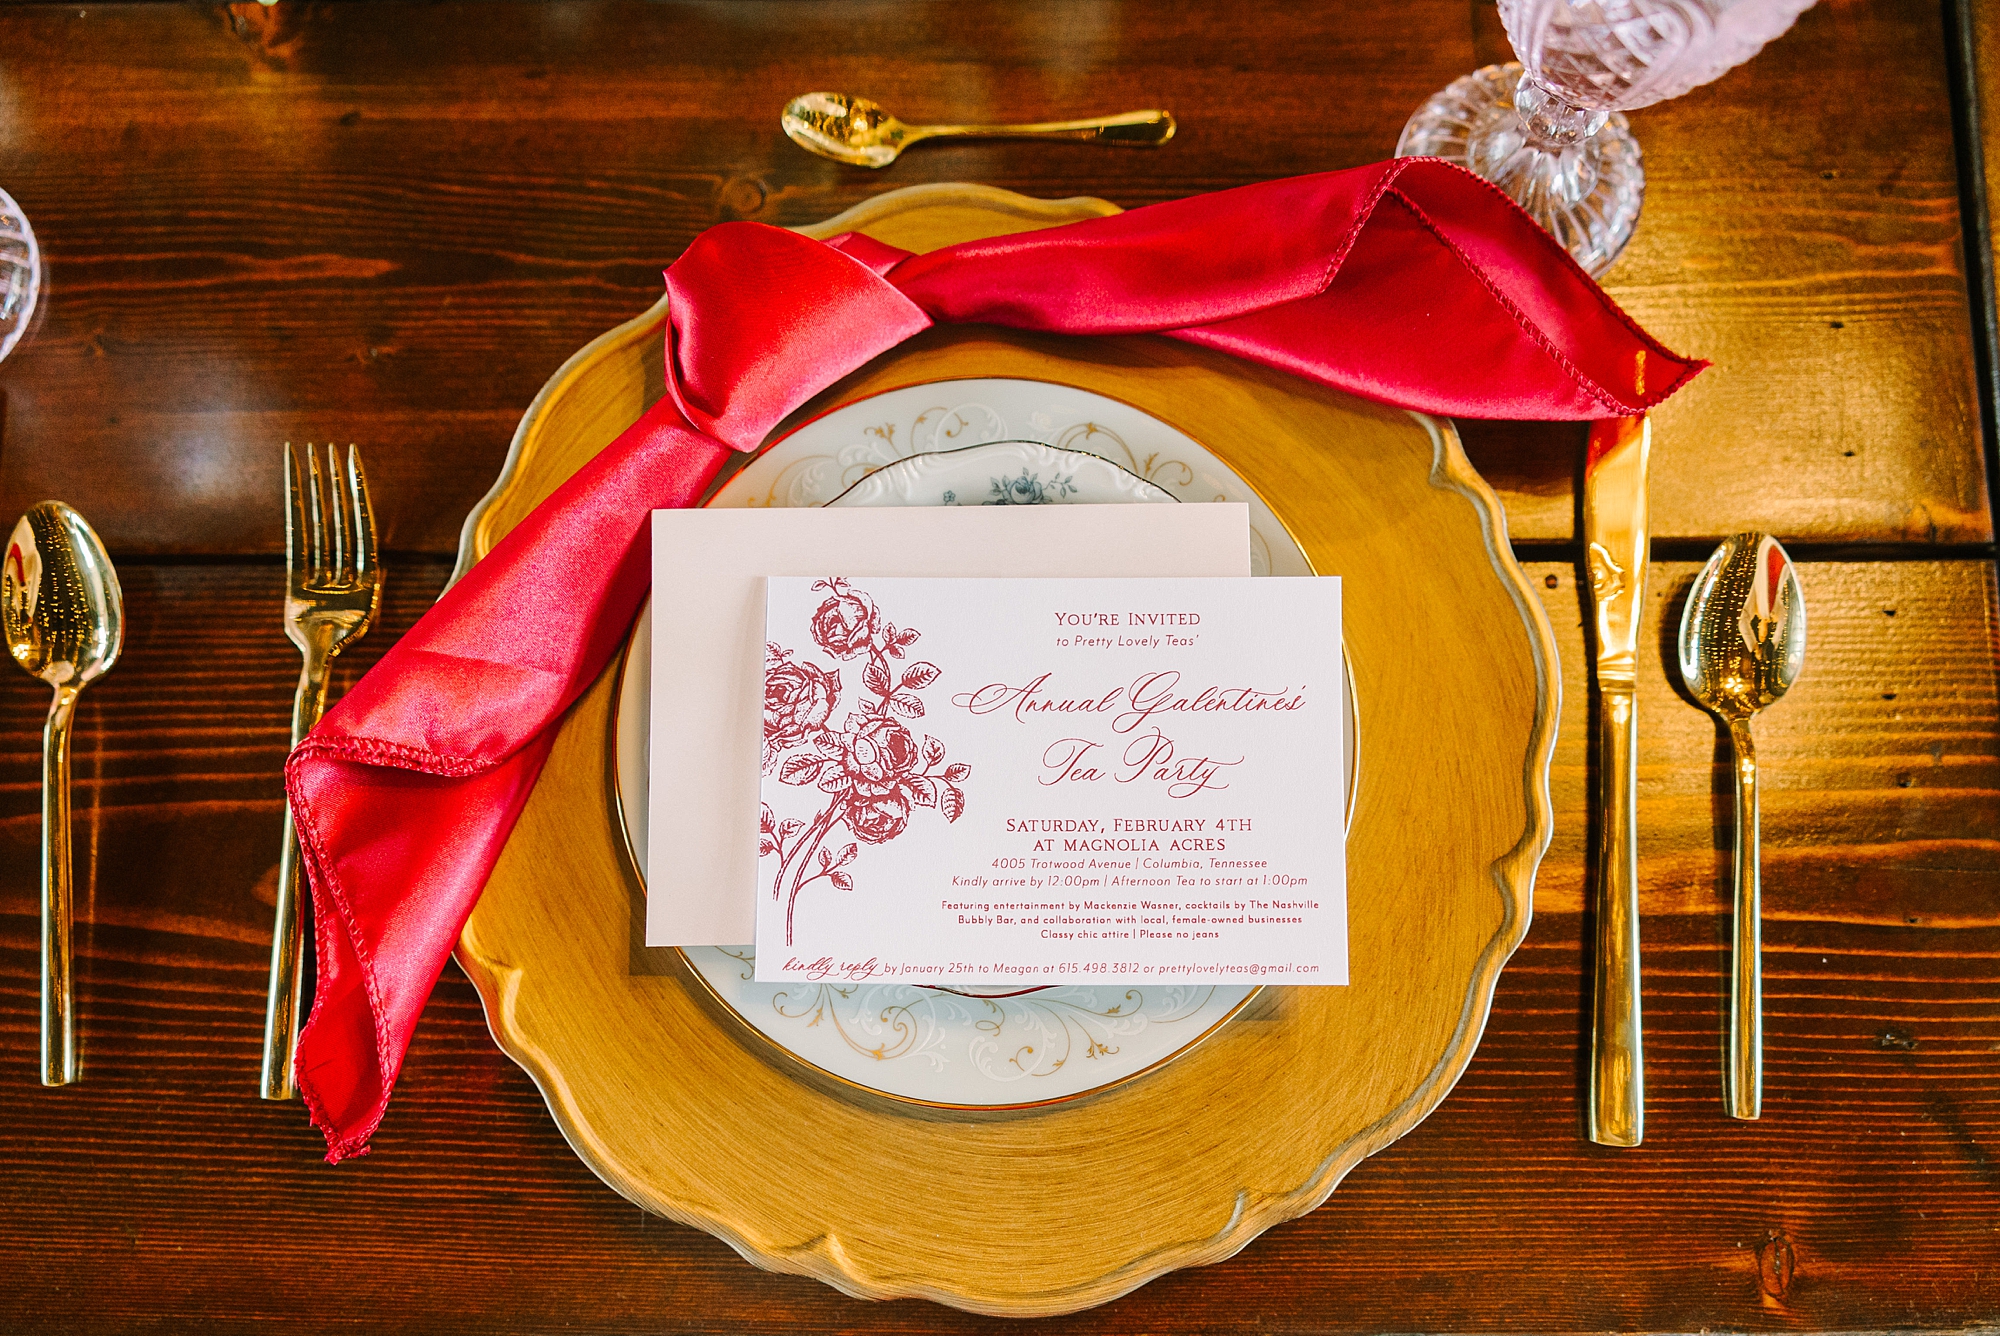 place setting for tea party with red napkin on gold charger